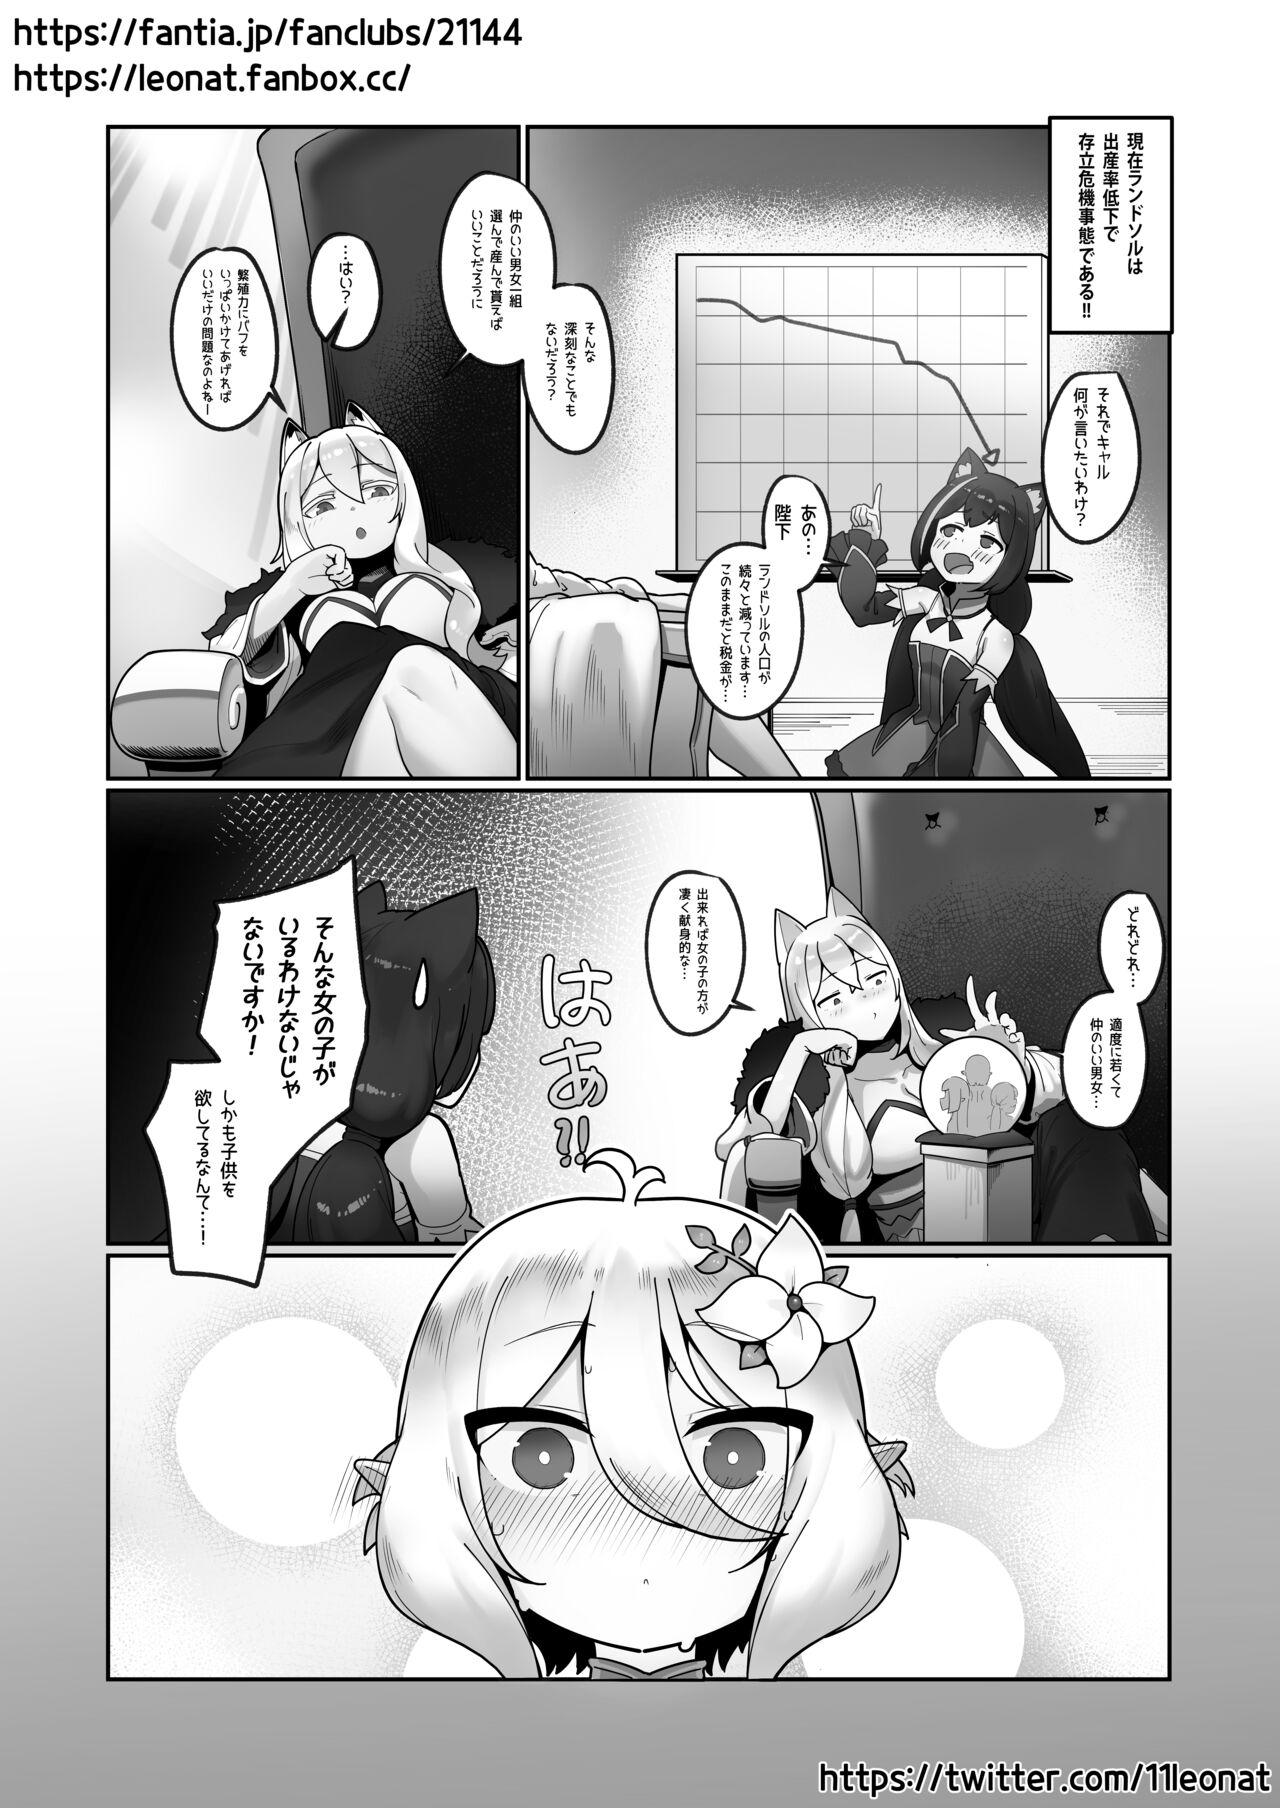 Story 【レオナト】コッコロ妊活日誌 - Princess connect Penis Sucking - Page 6